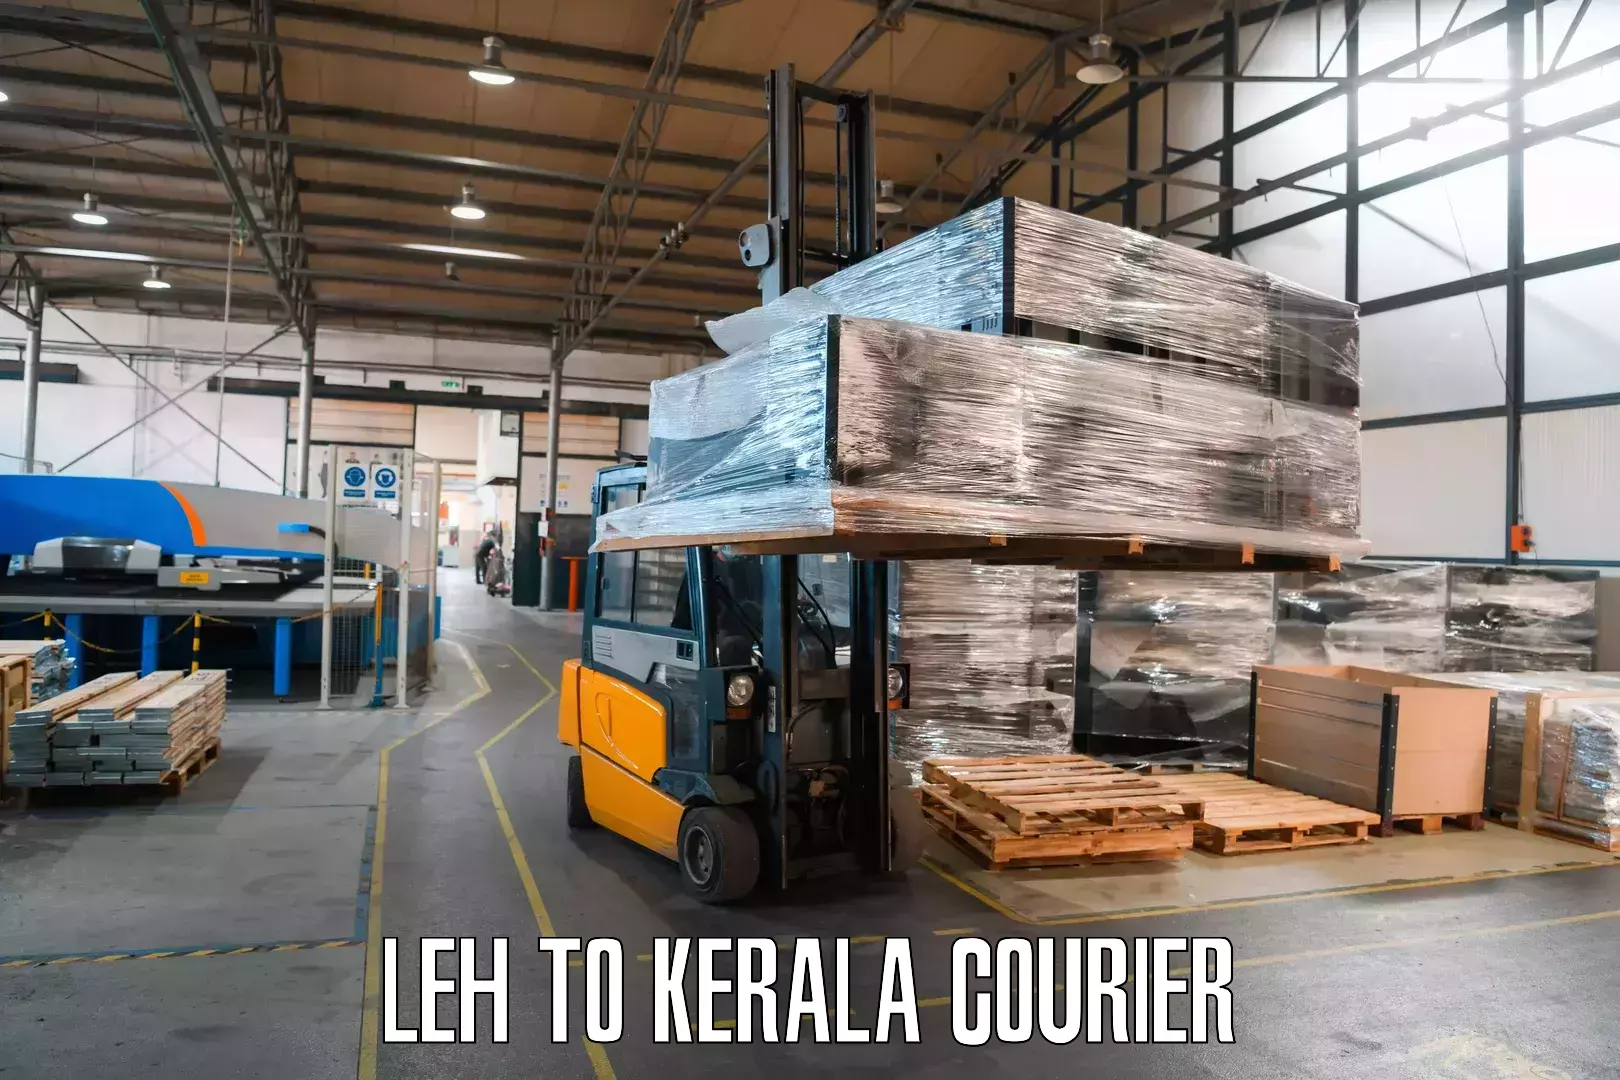 Courier service partnerships Leh to Punalur